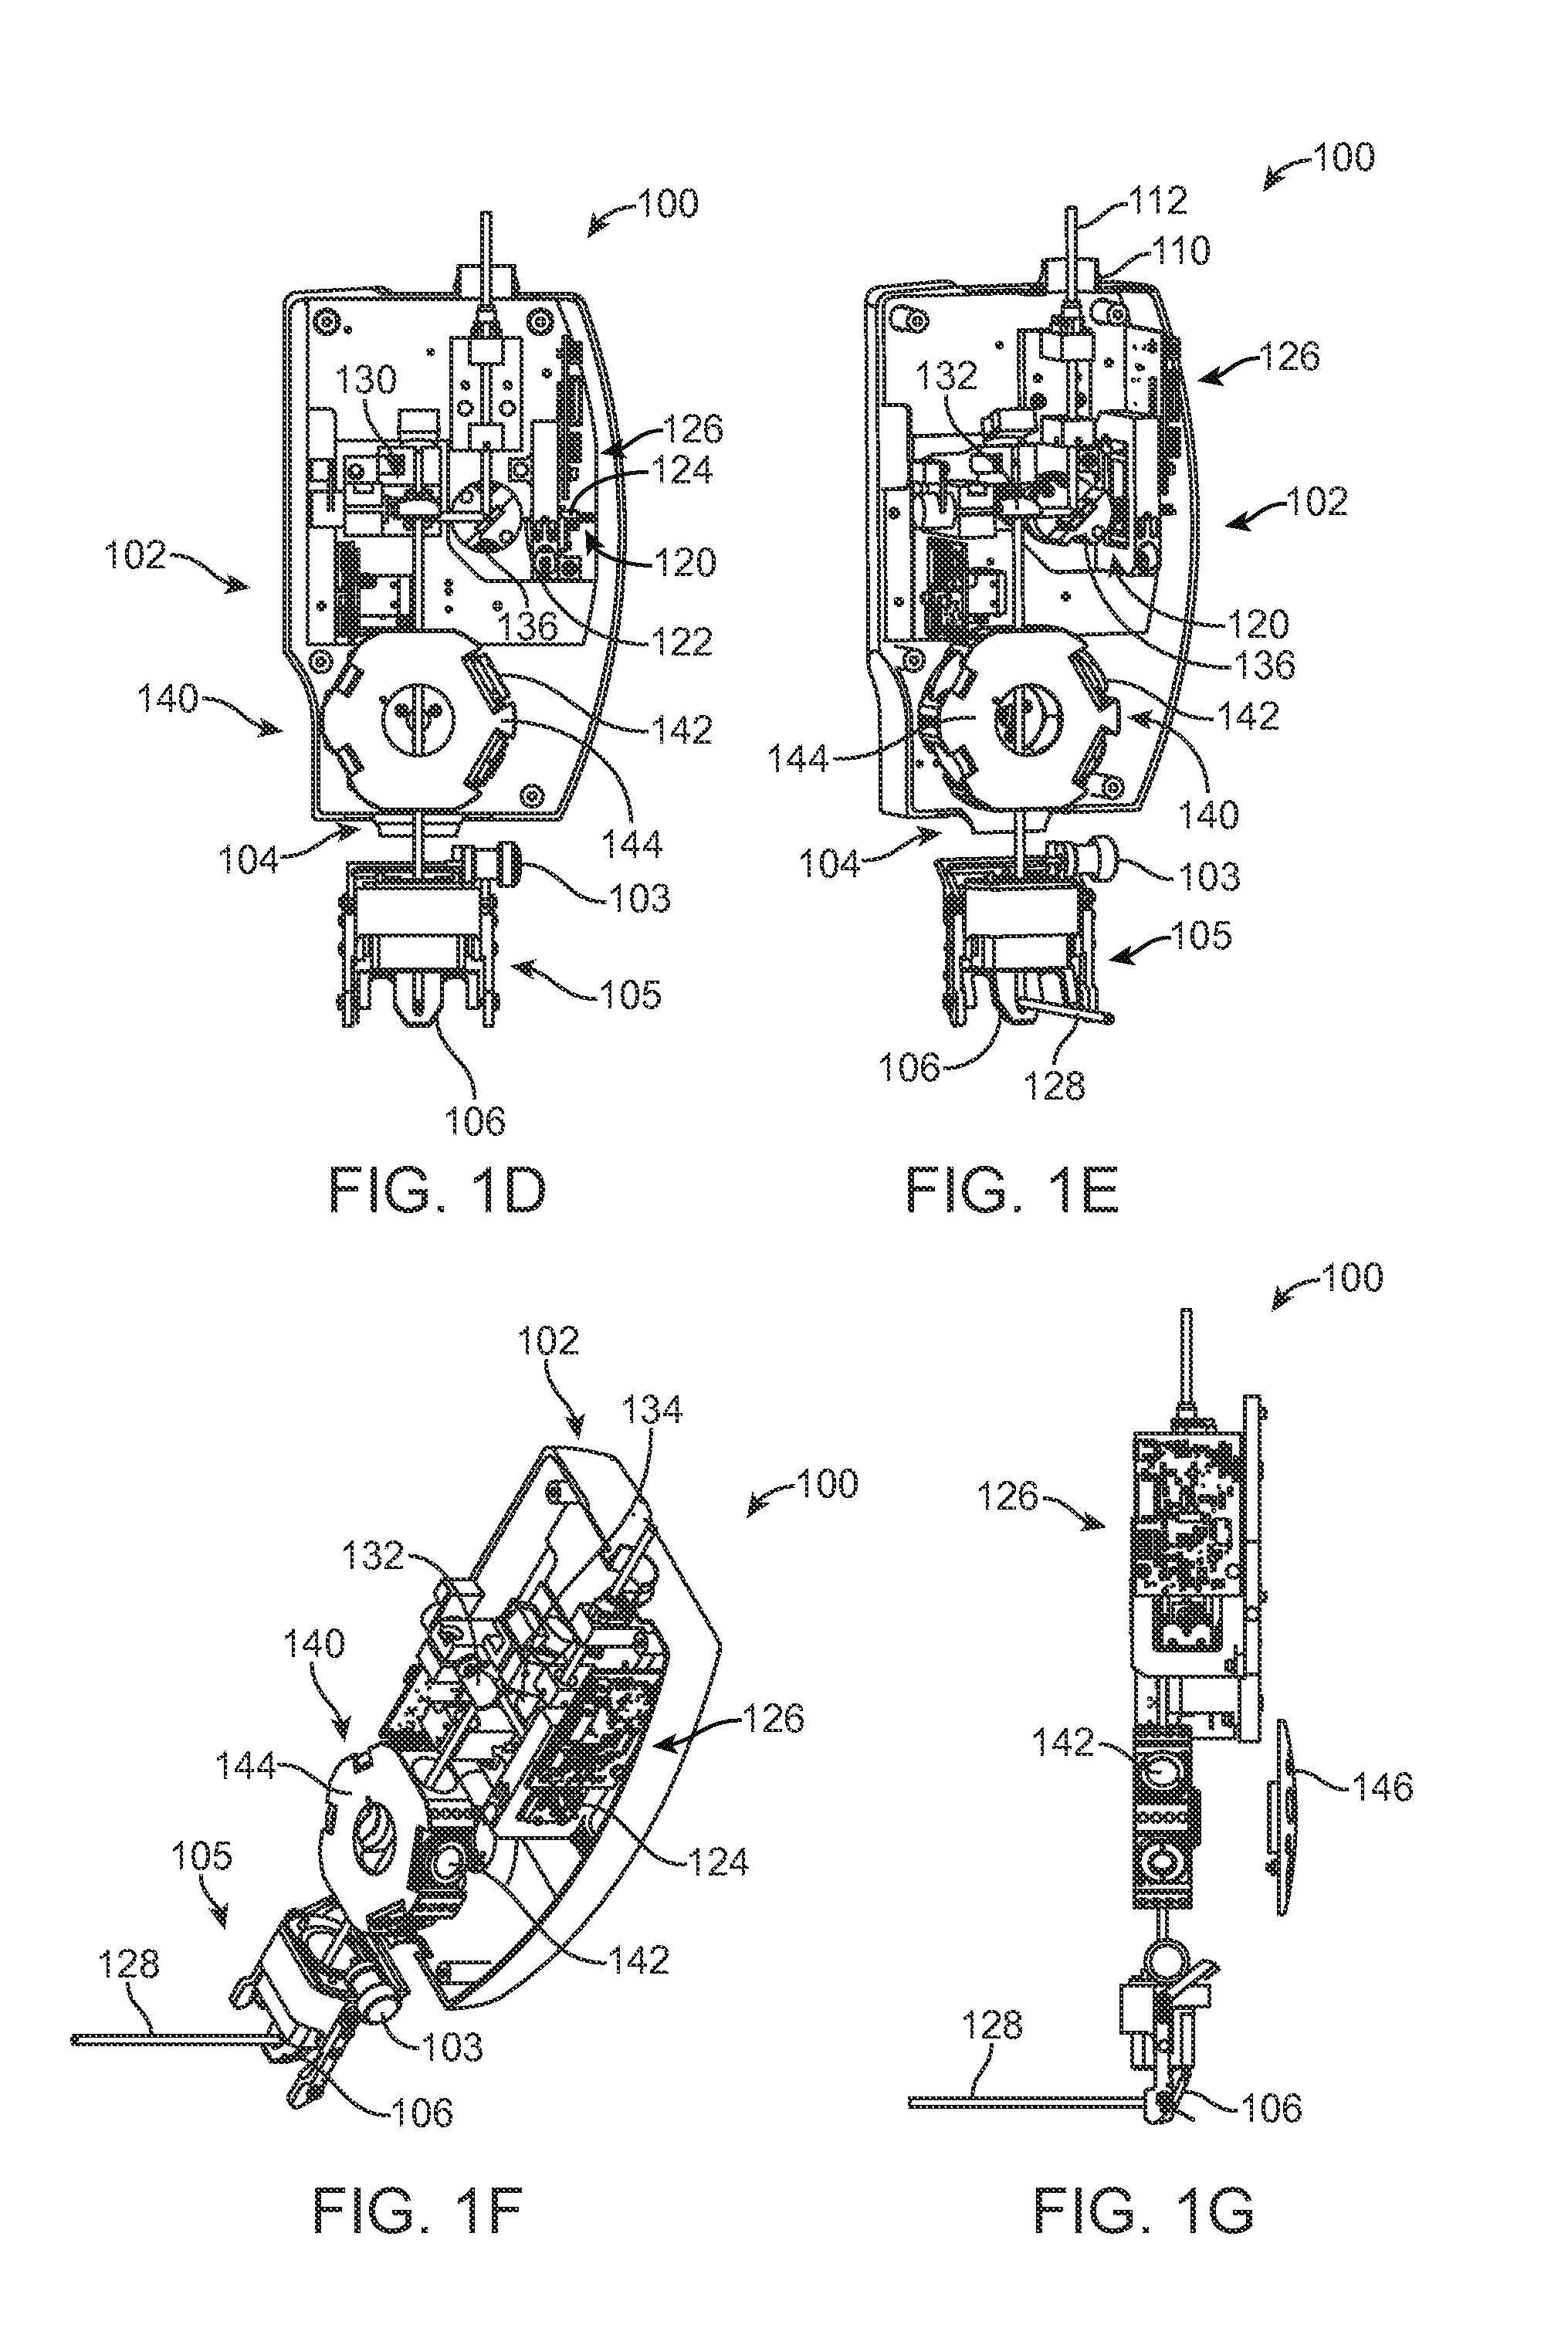 Micropulse grid pattern laser treatment and methods